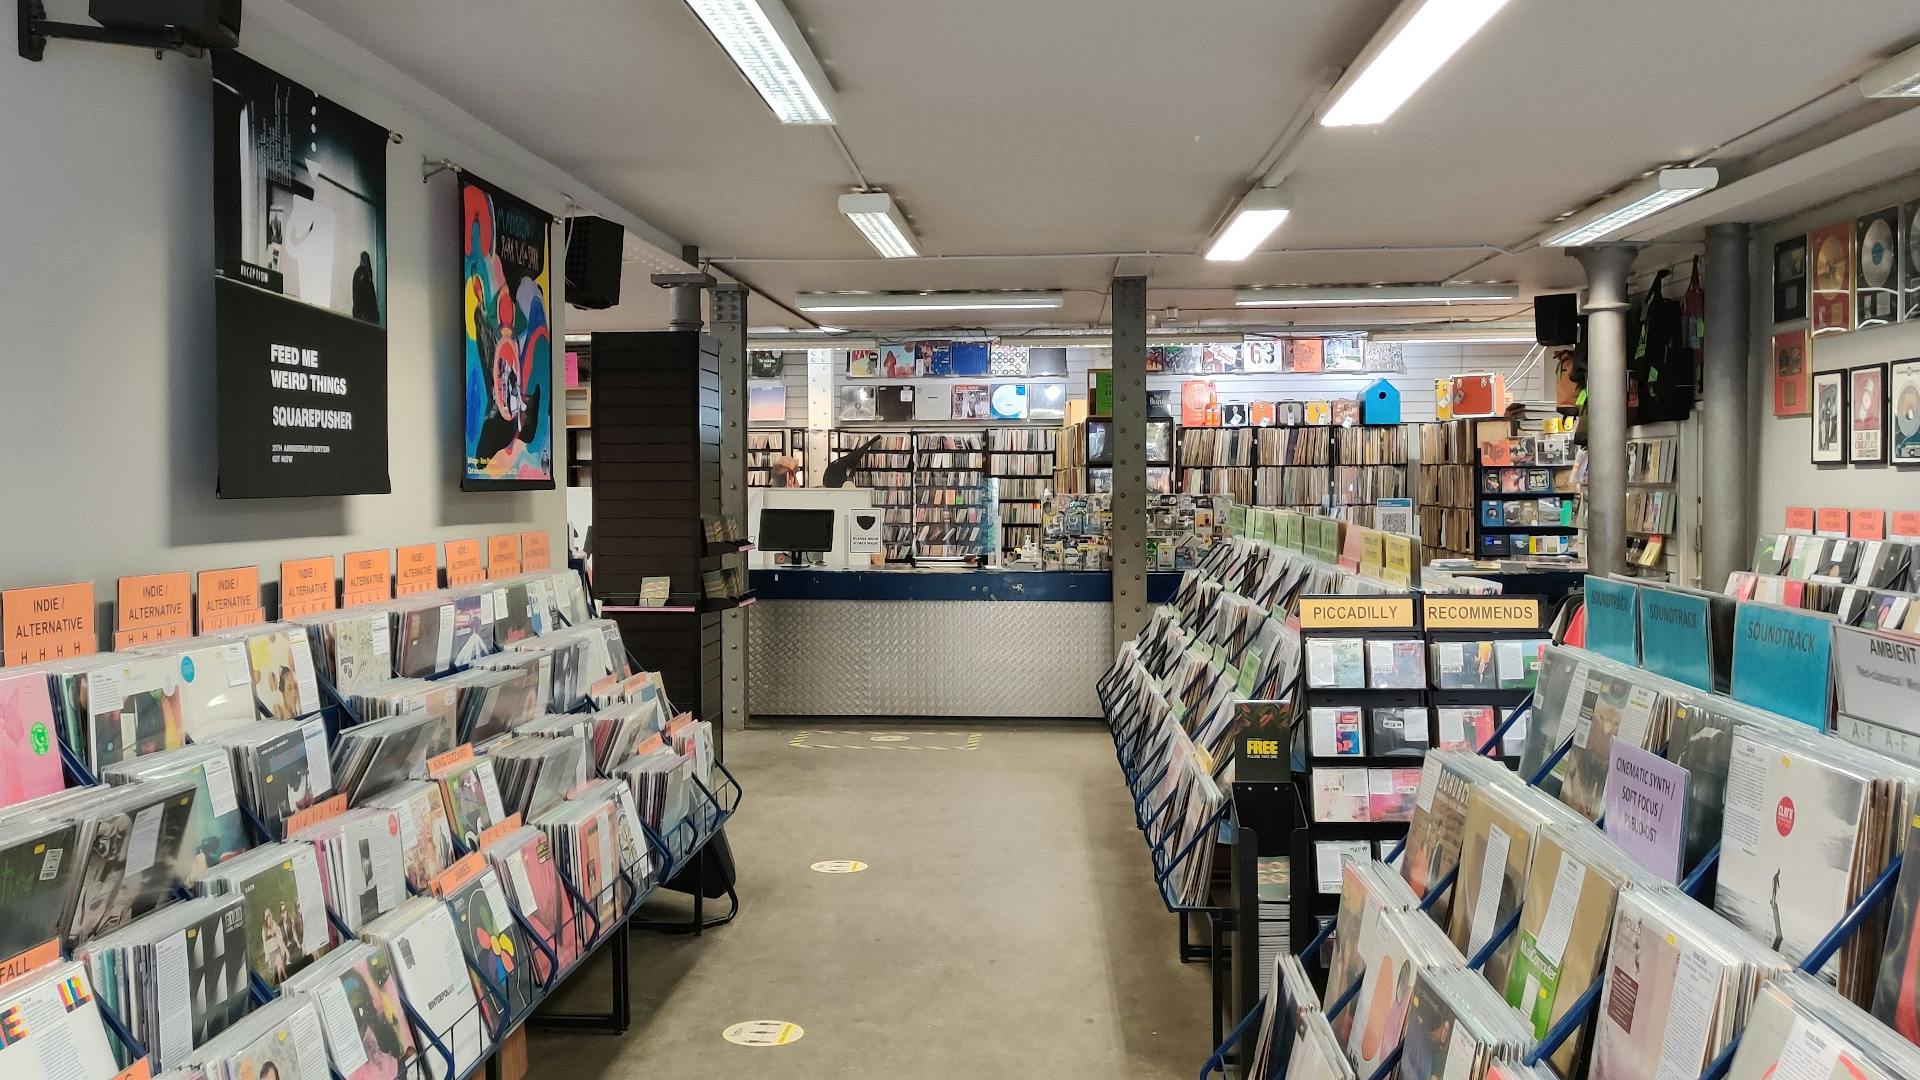 Piccadilly Records recommends: Bonobo, Silverbacks, Approach Release, Yard Act + Boris